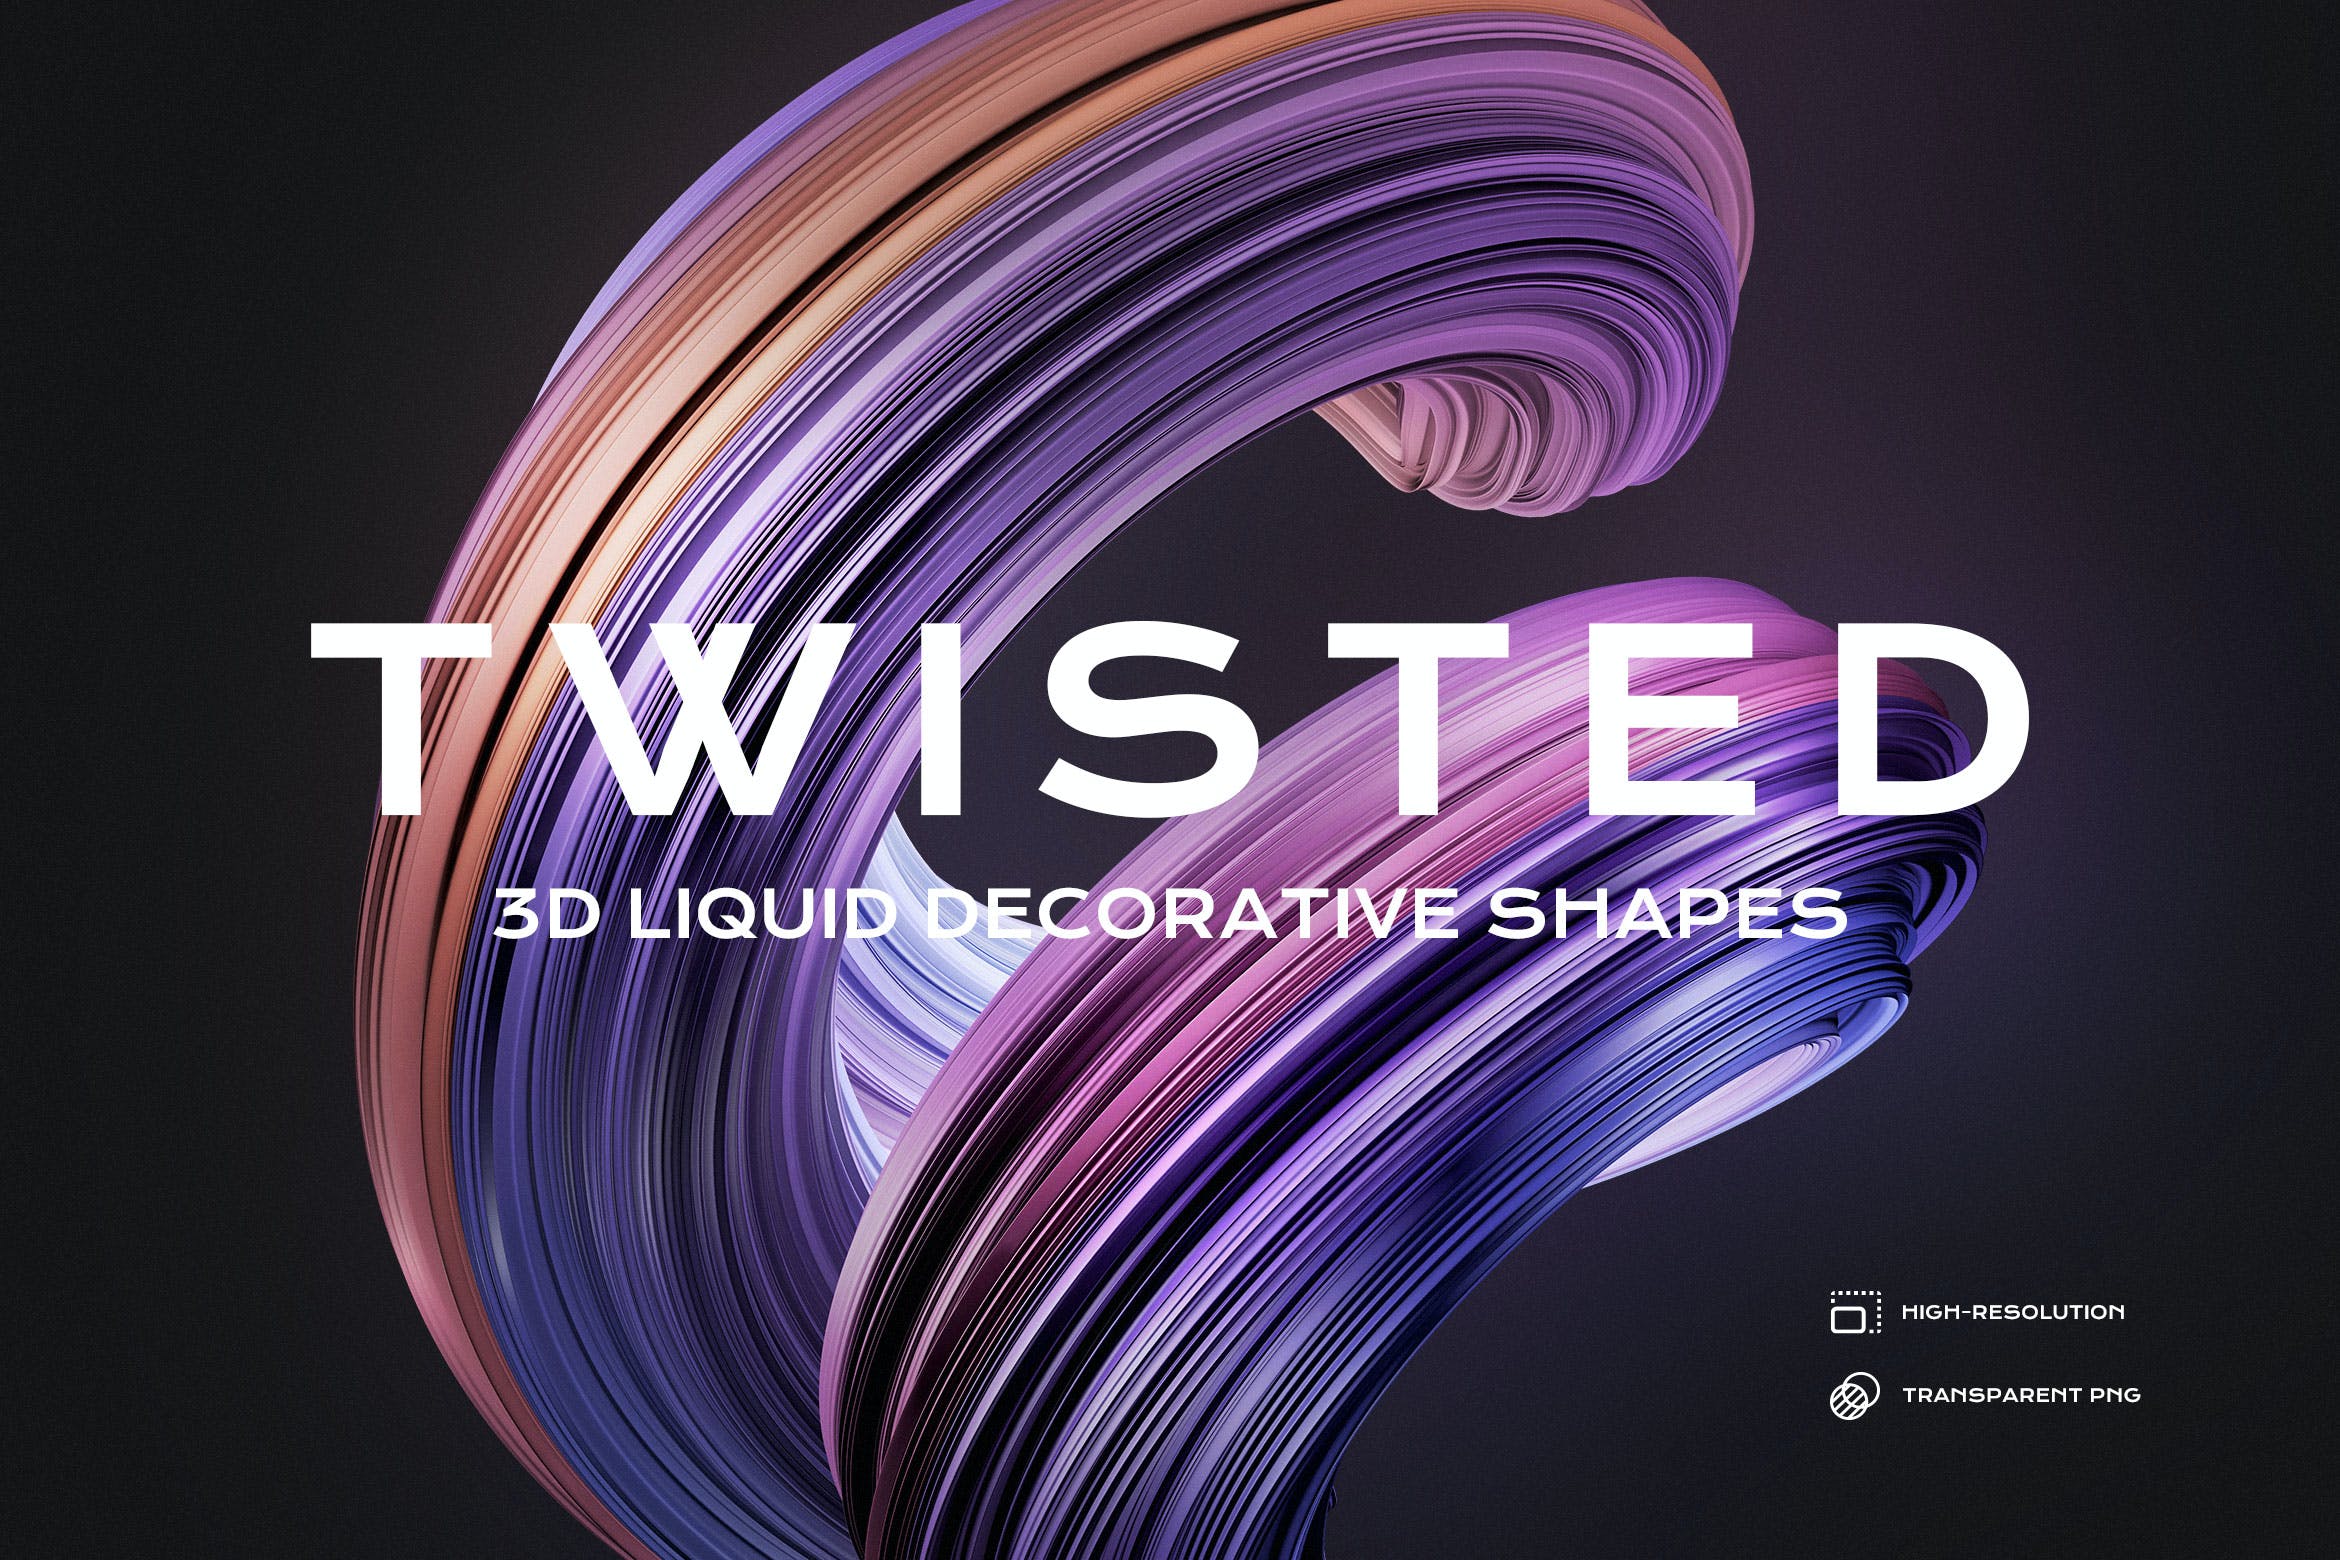 3D扭曲装饰形状背景 3D Twisted Decorative Shapes Backgrounds 图片素材 第1张